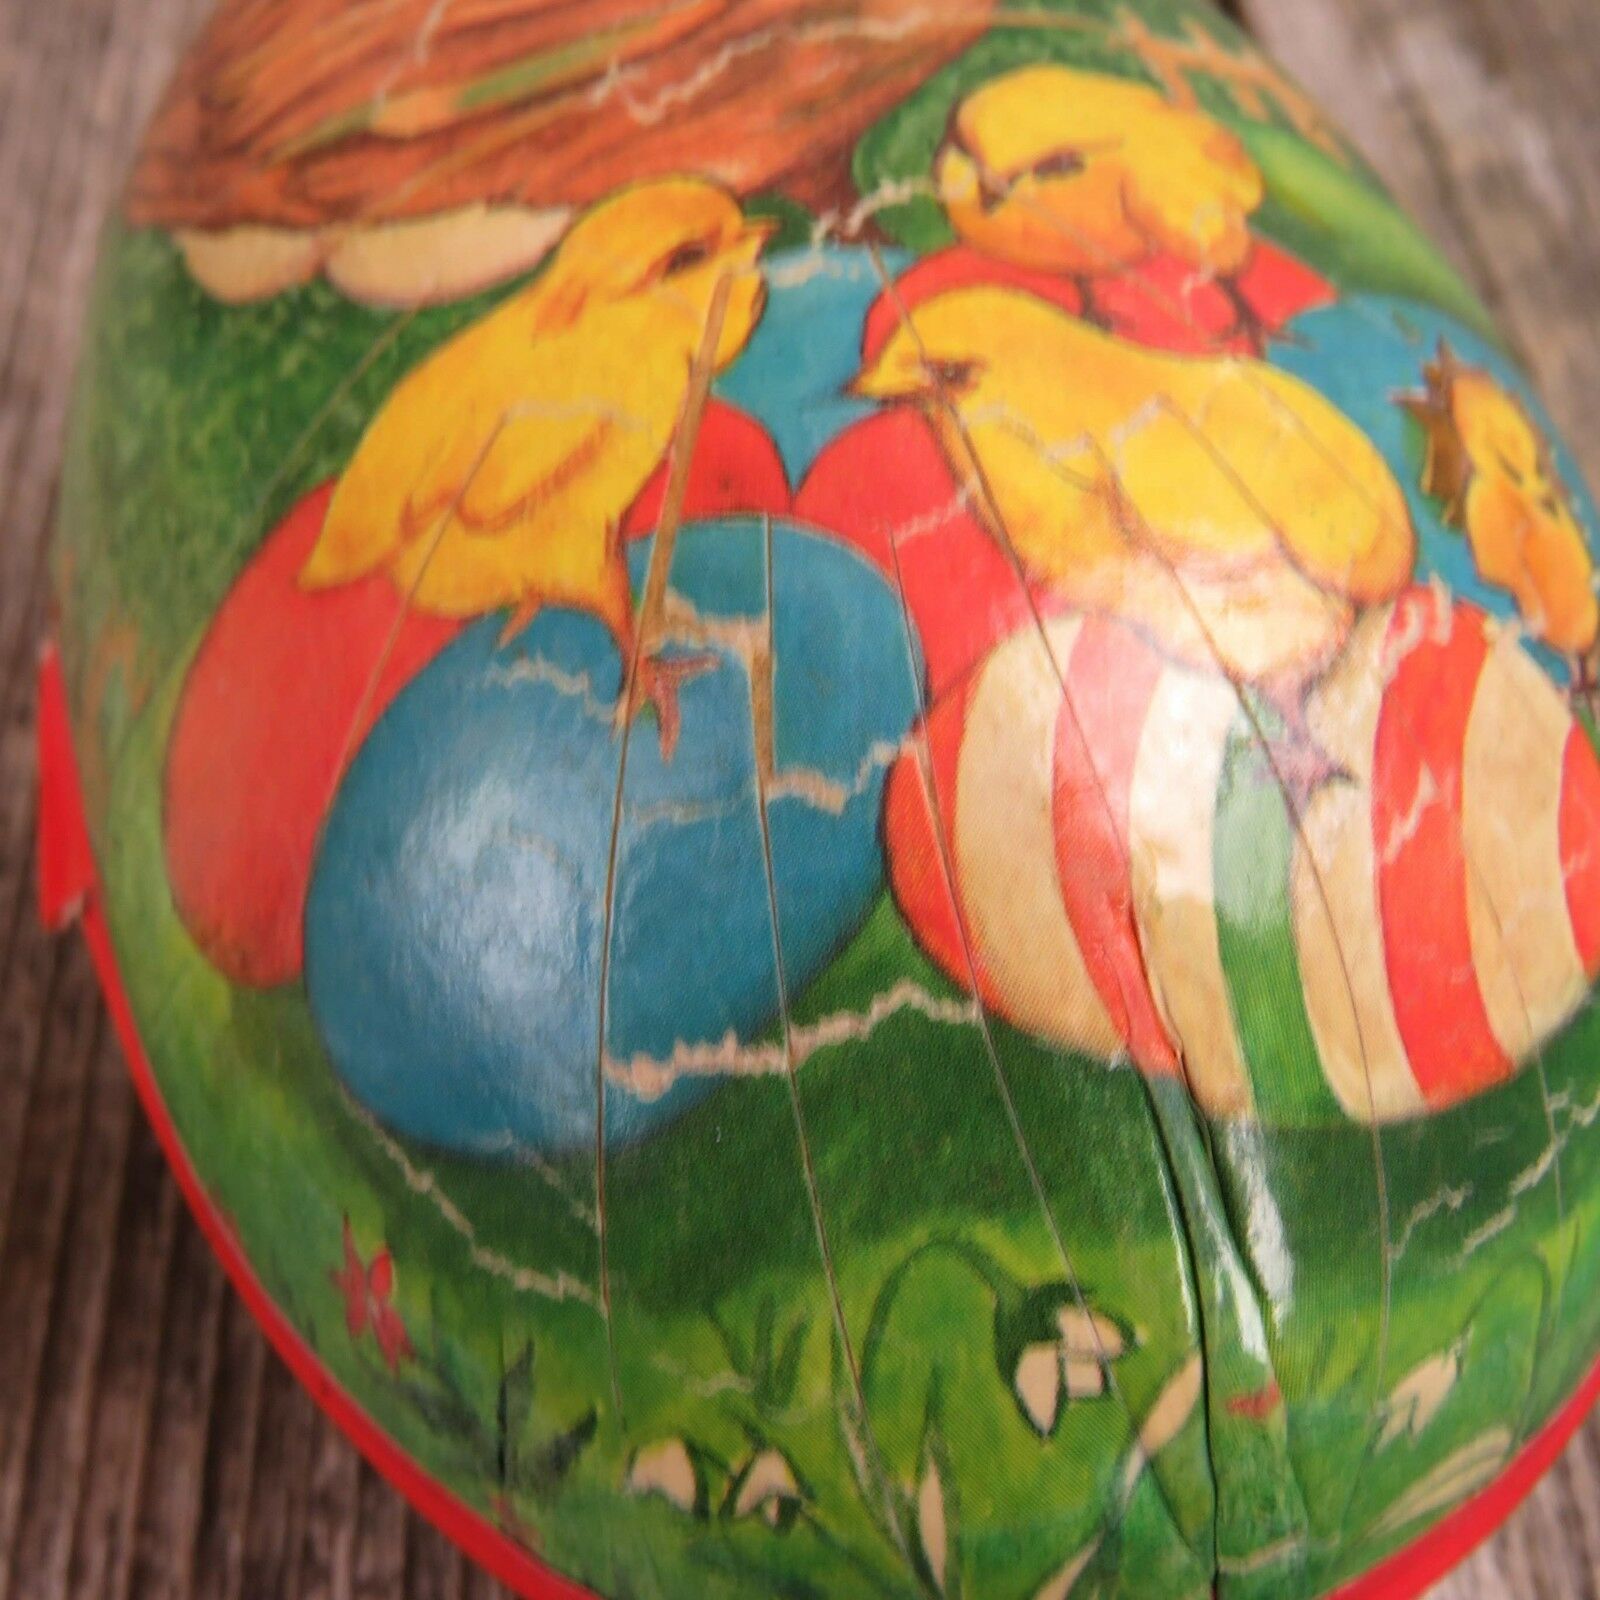 Vintage Easter Egg Paper Mache Candy Holder Container with Chick Toy - At Grandma's Table